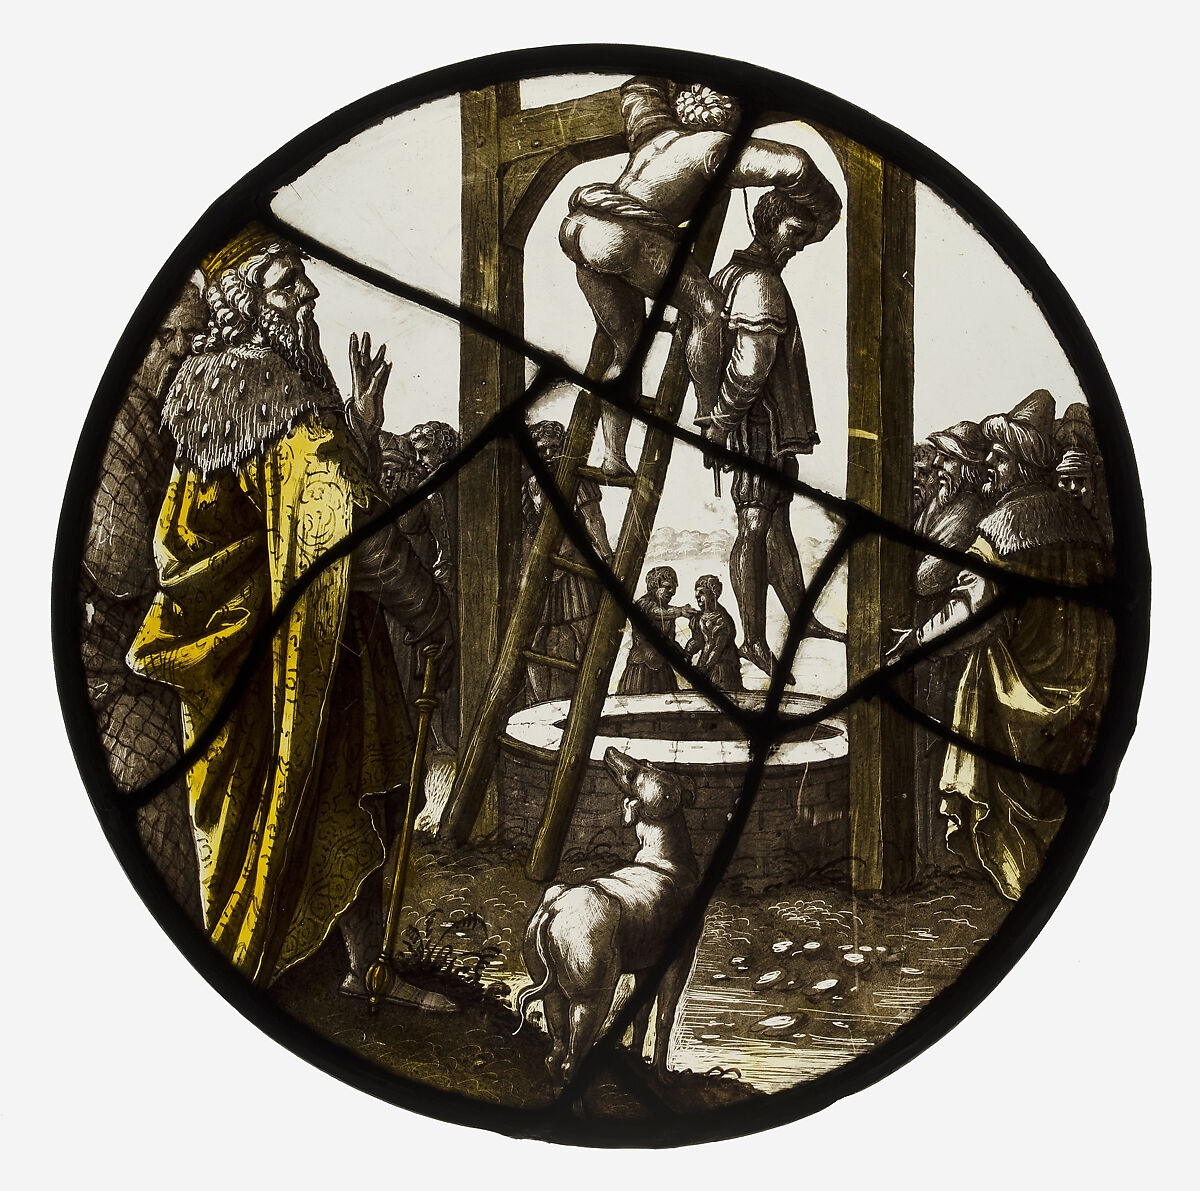 Roundel with the Hanging of Haman, Style of Jan Swart van Groningen (Netherlandish, Groningen ca. 1490/1500–1553 or later Antwerp) (?), Colorless glass, silver stain, vitreous paint, North Netherlandish (?) 